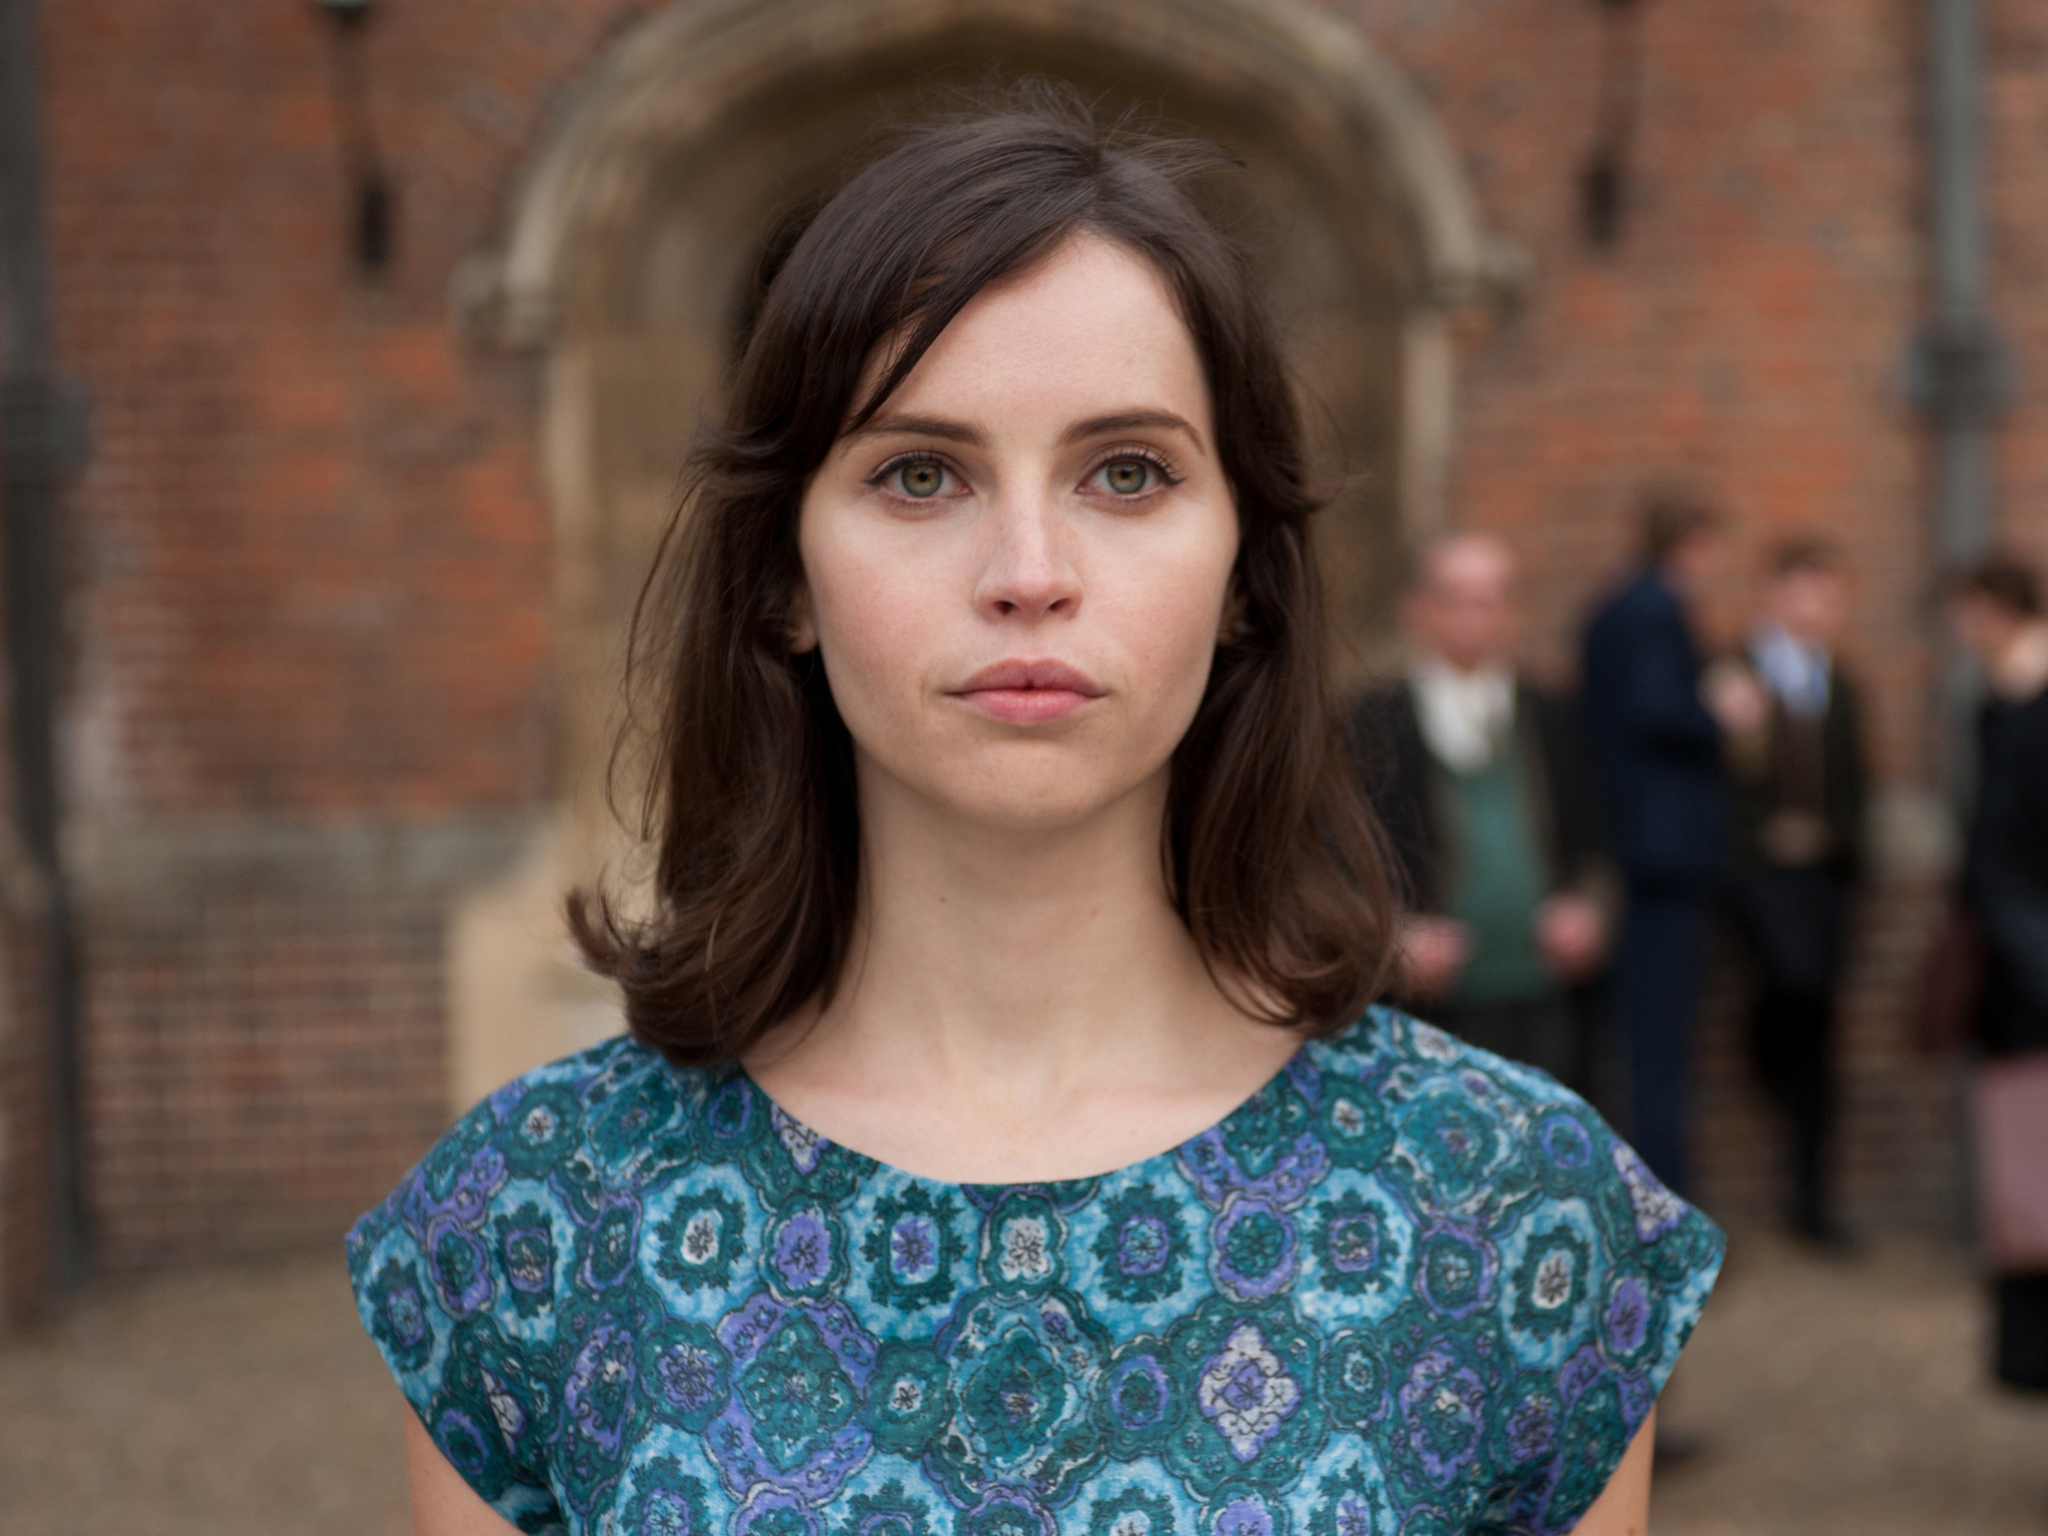 Felicity Jones in The Theory of Everything